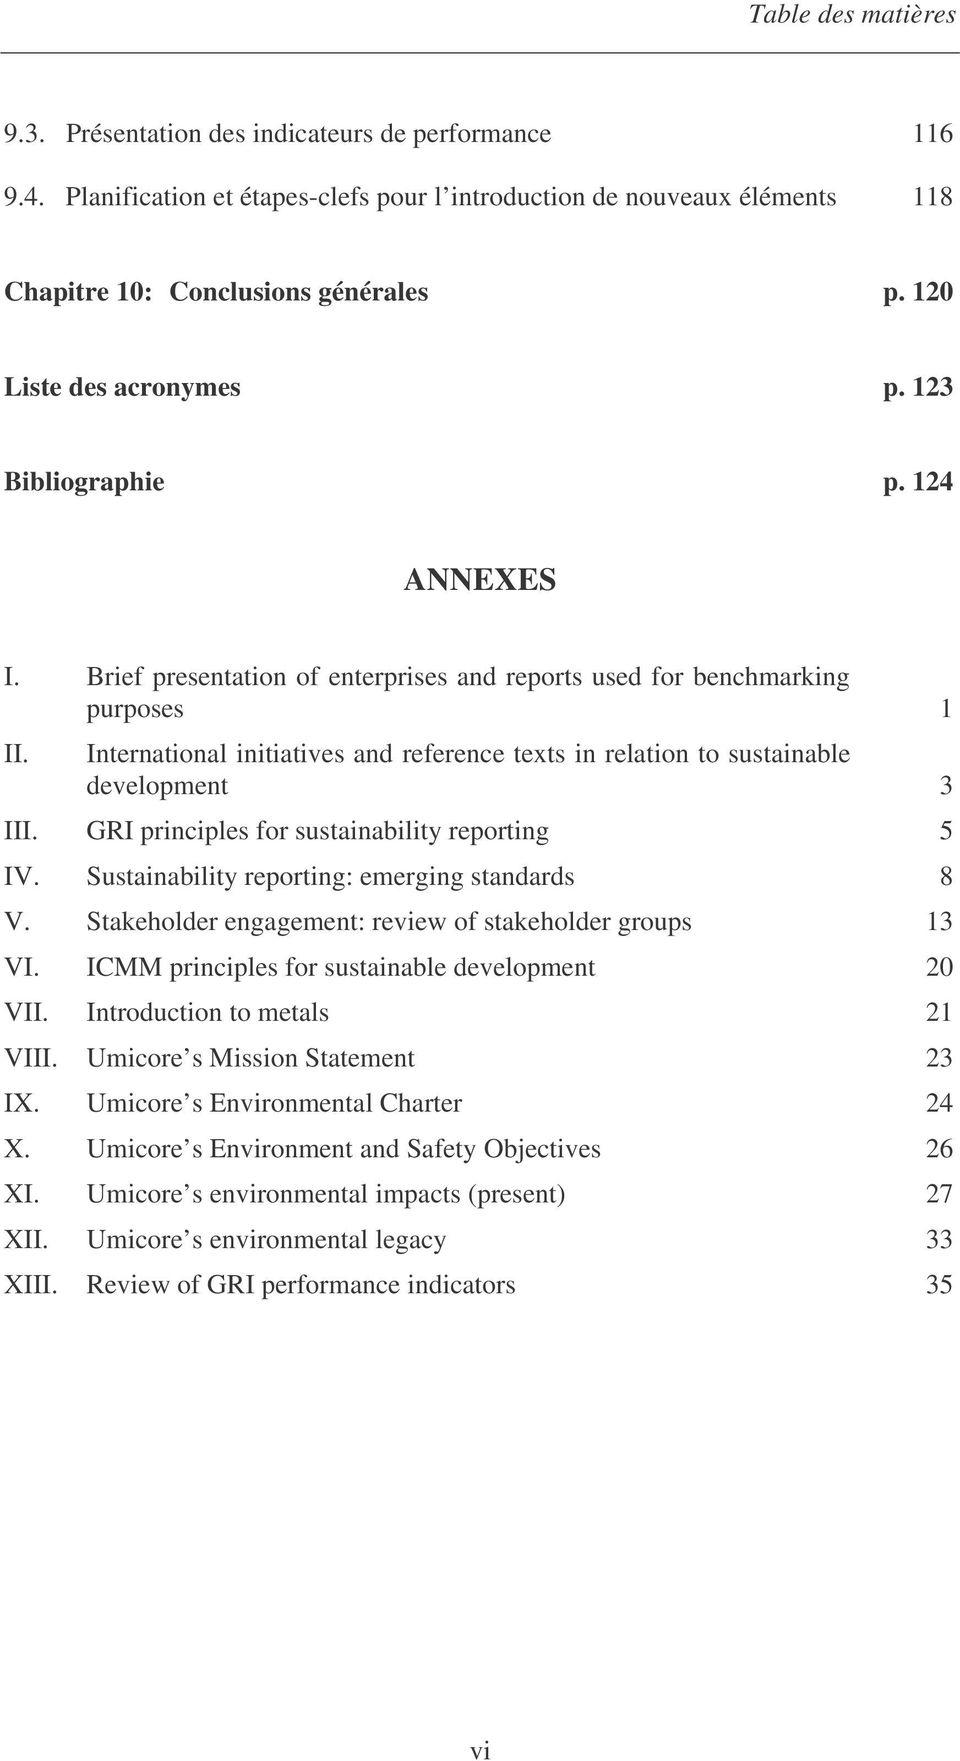 International initiatives and reference texts in relation to sustainable development 3 III. GRI principles for sustainability reporting 5 IV. Sustainability reporting: emerging standards 8 V.